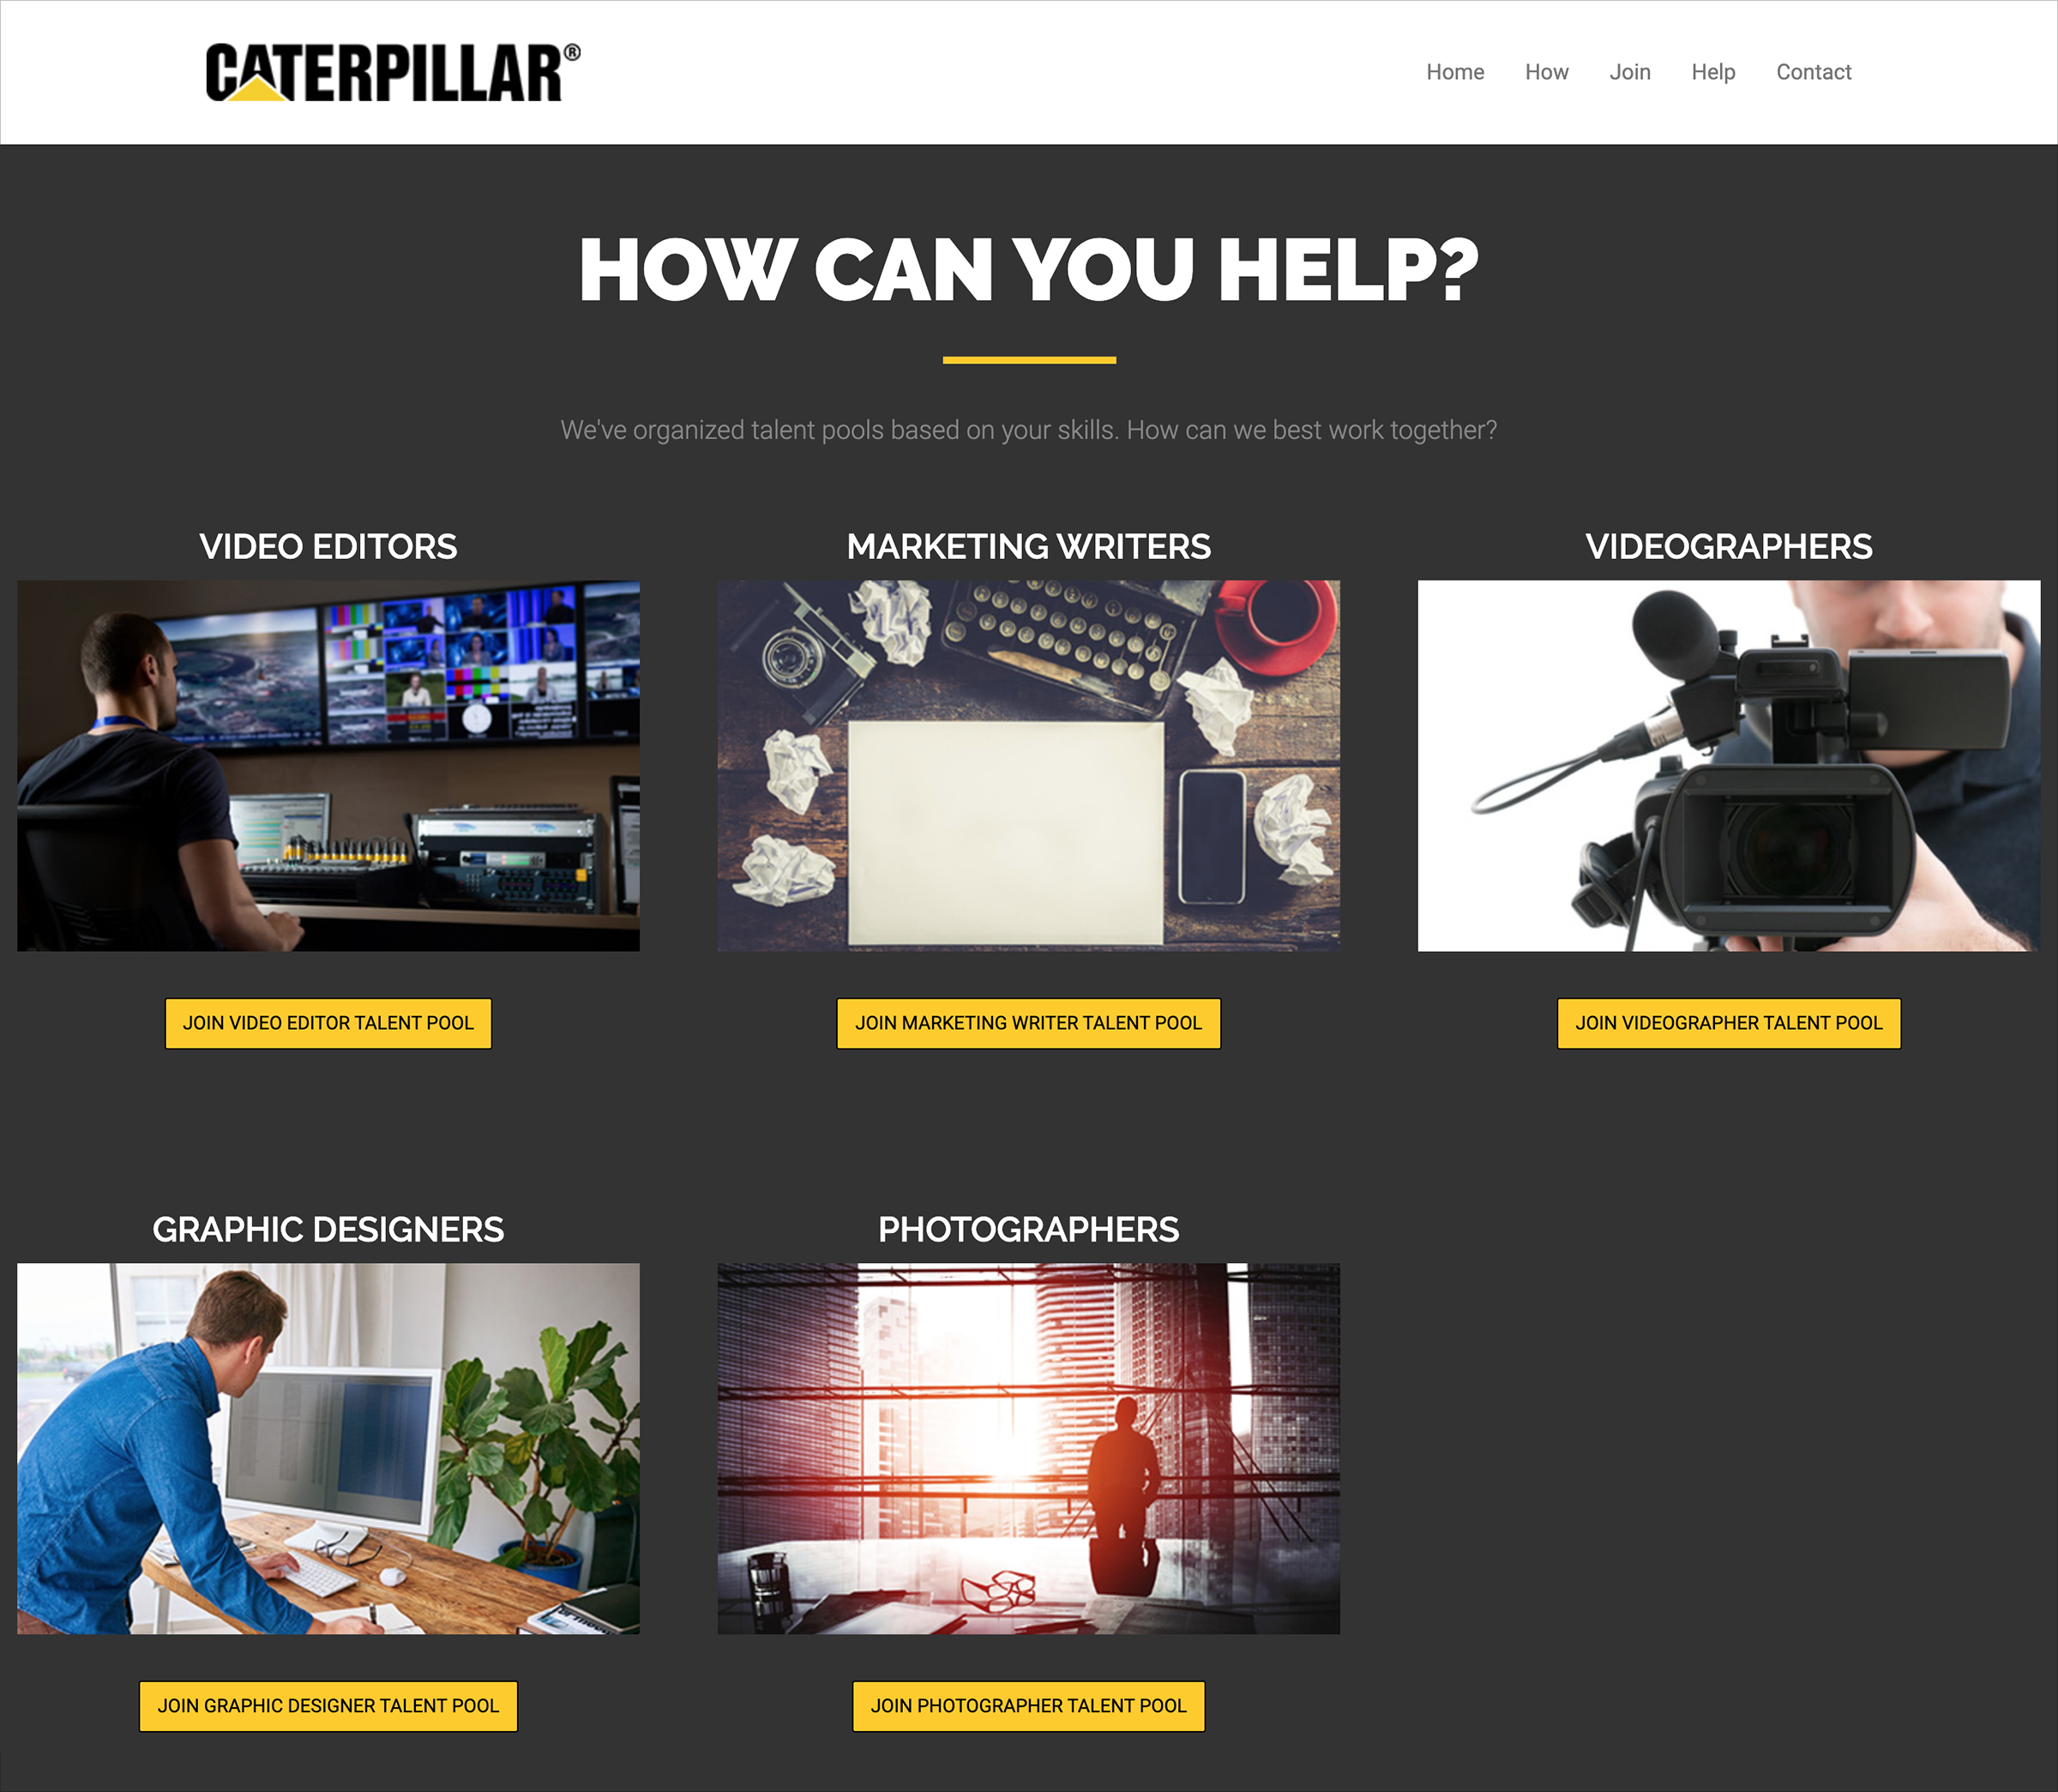 Caterpillar’s website displays its range of talent communities based on the skills of candidates.